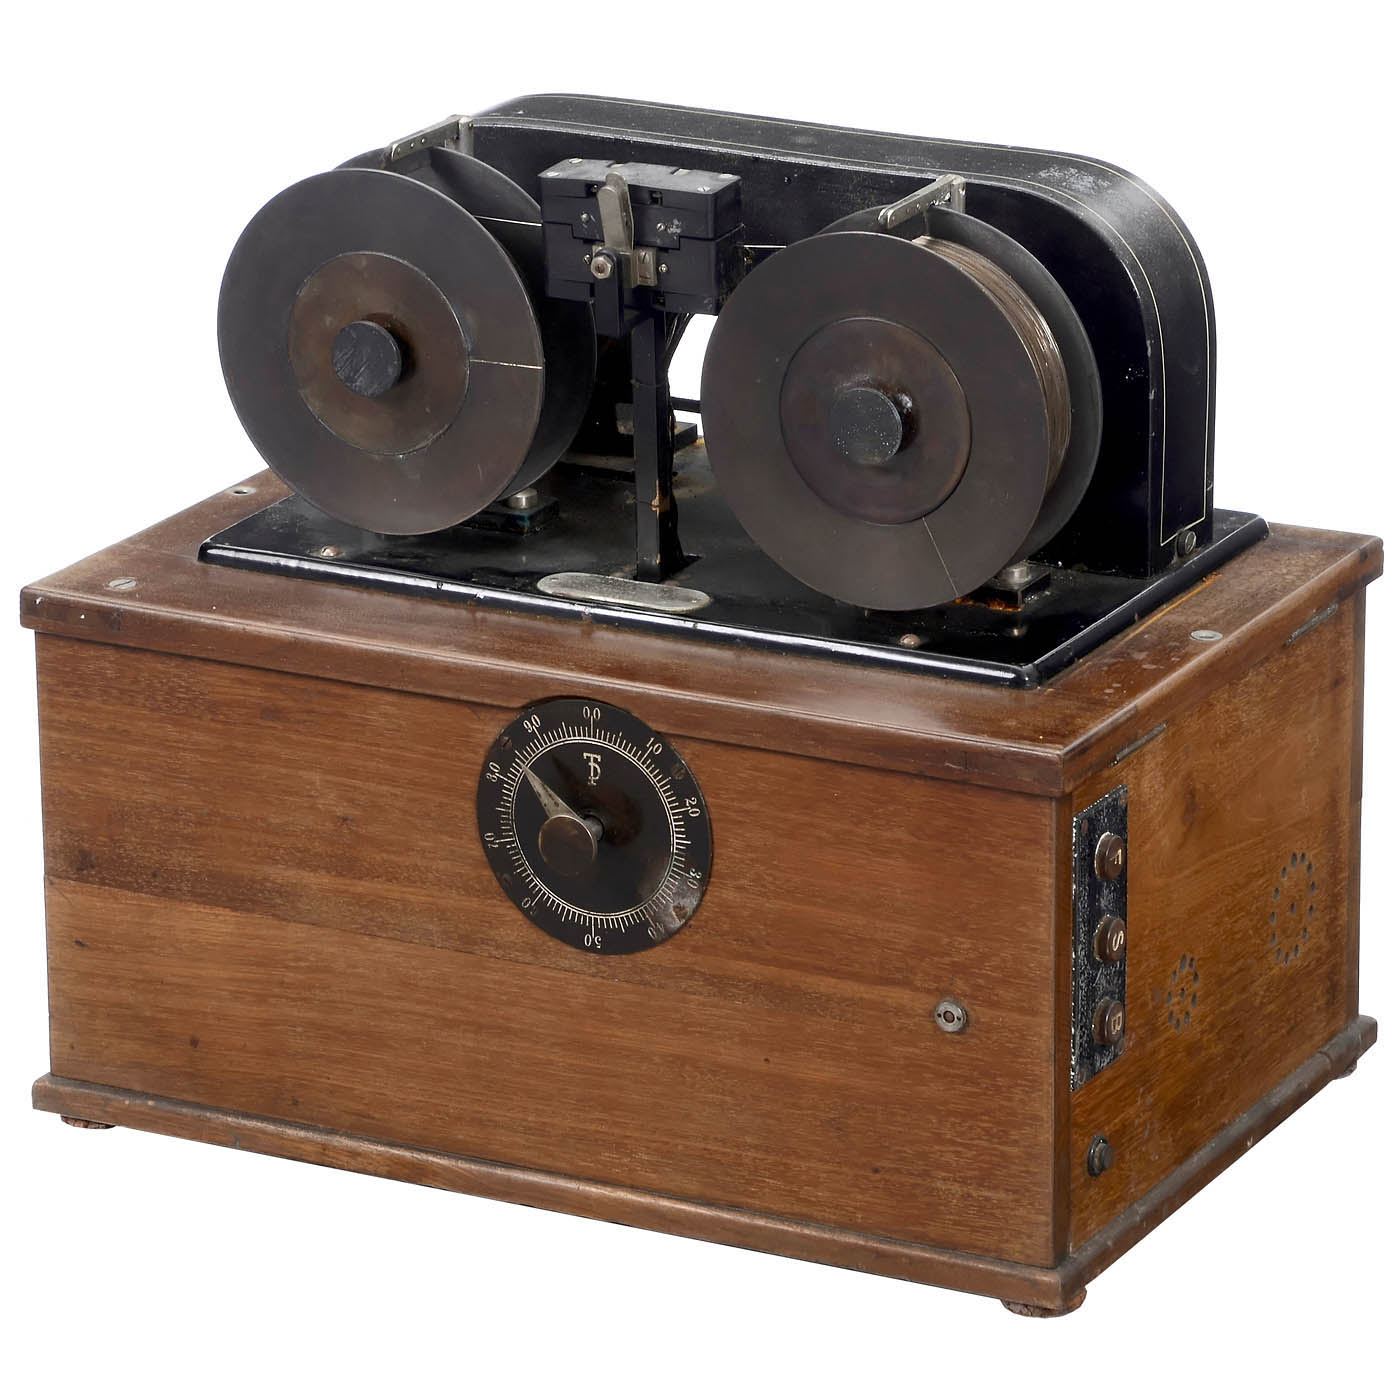 Telegraphone Magnetic Wire-Recording and Repeating Device, c. 1905